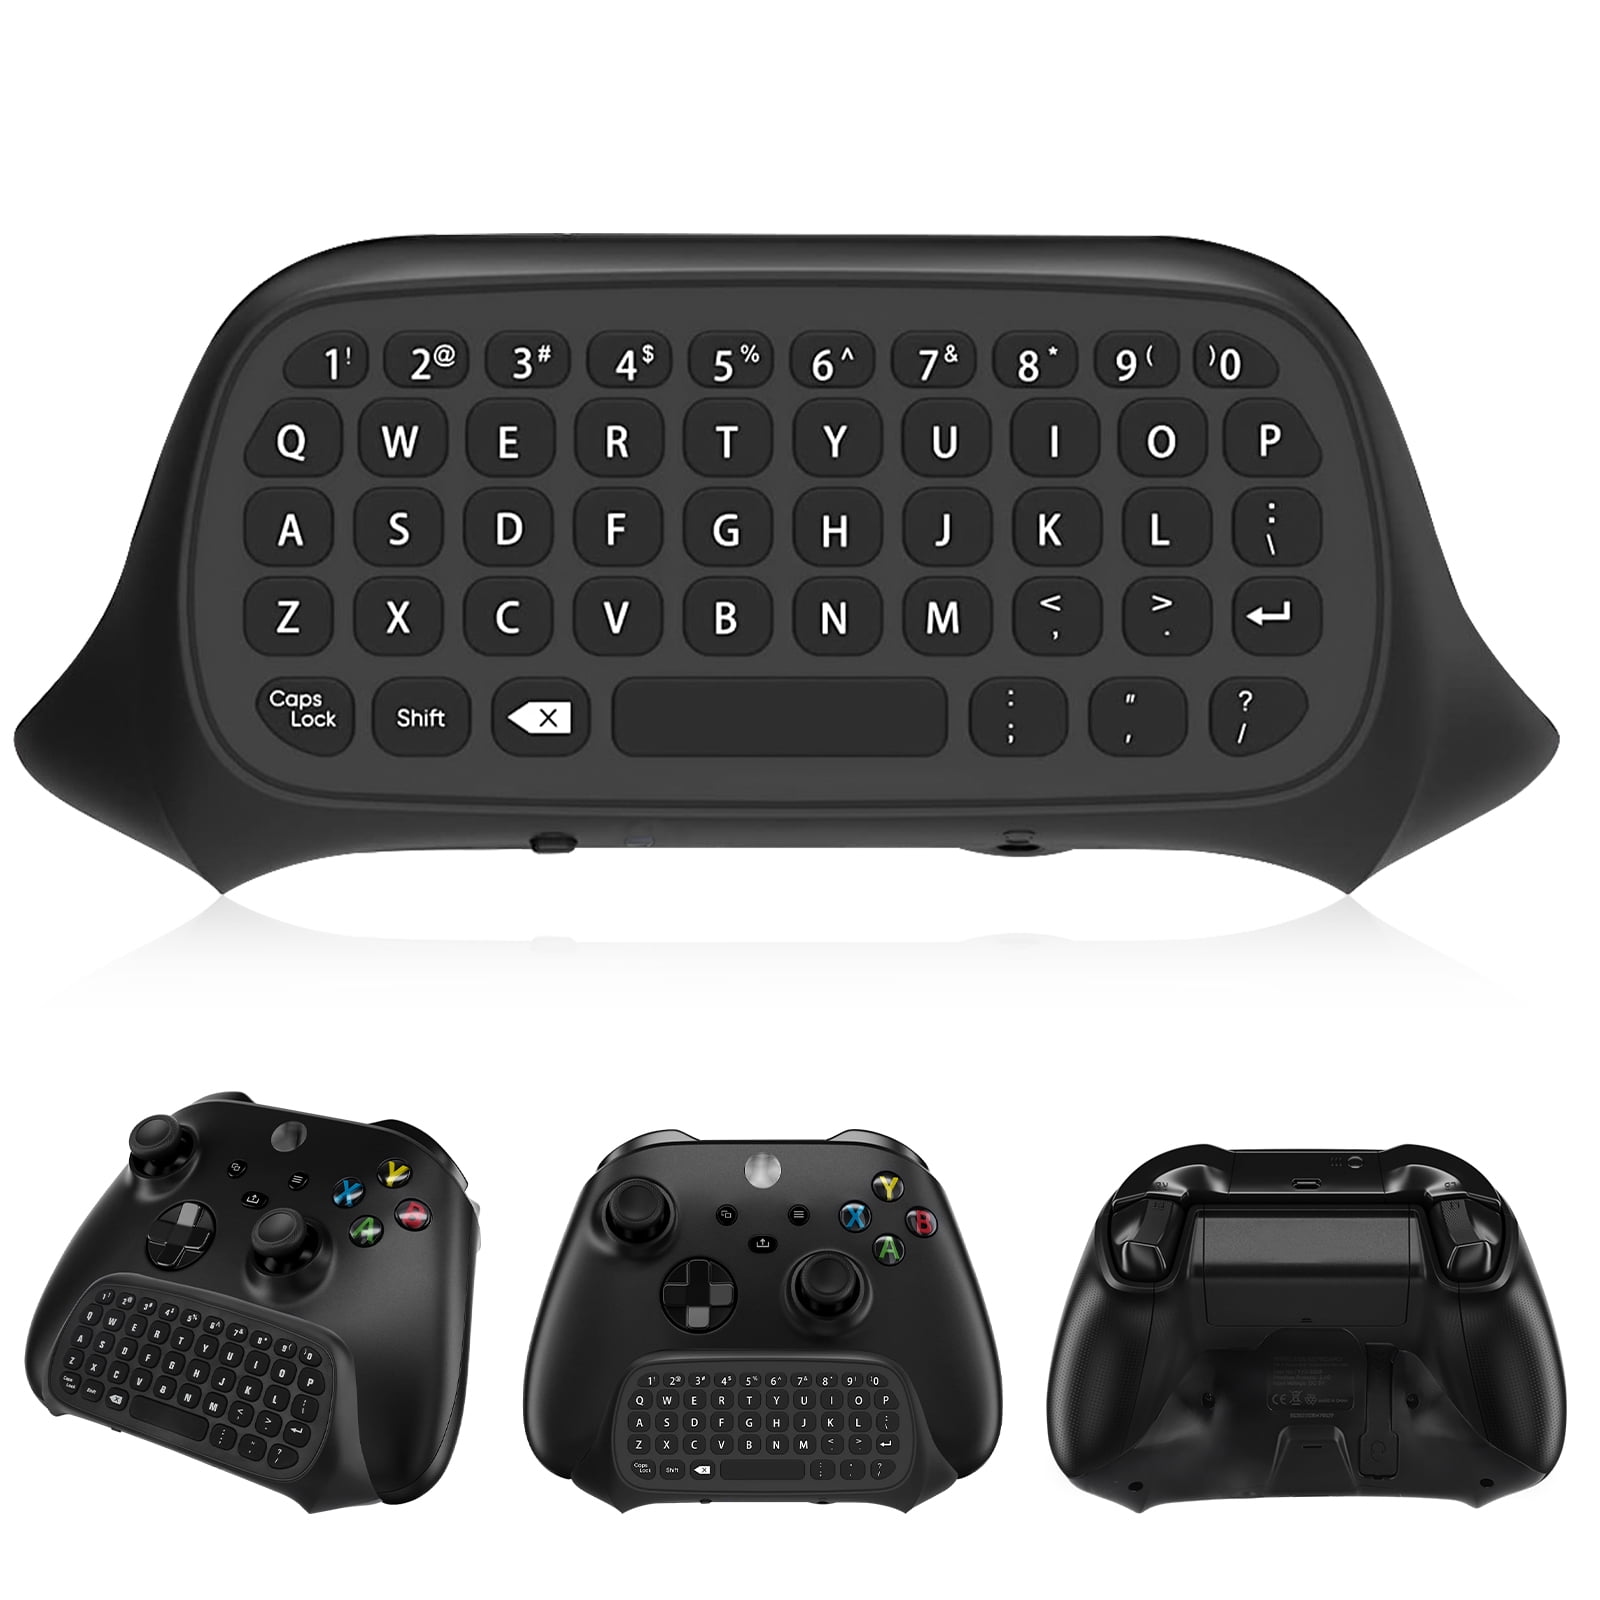 Old Skool Xbox One Chatpad Mini Wireless Keyboard with 3.5m Headphone Jack 2.4G Messenger Pad Text Pad for Microsoft Xbox One Controller Black 